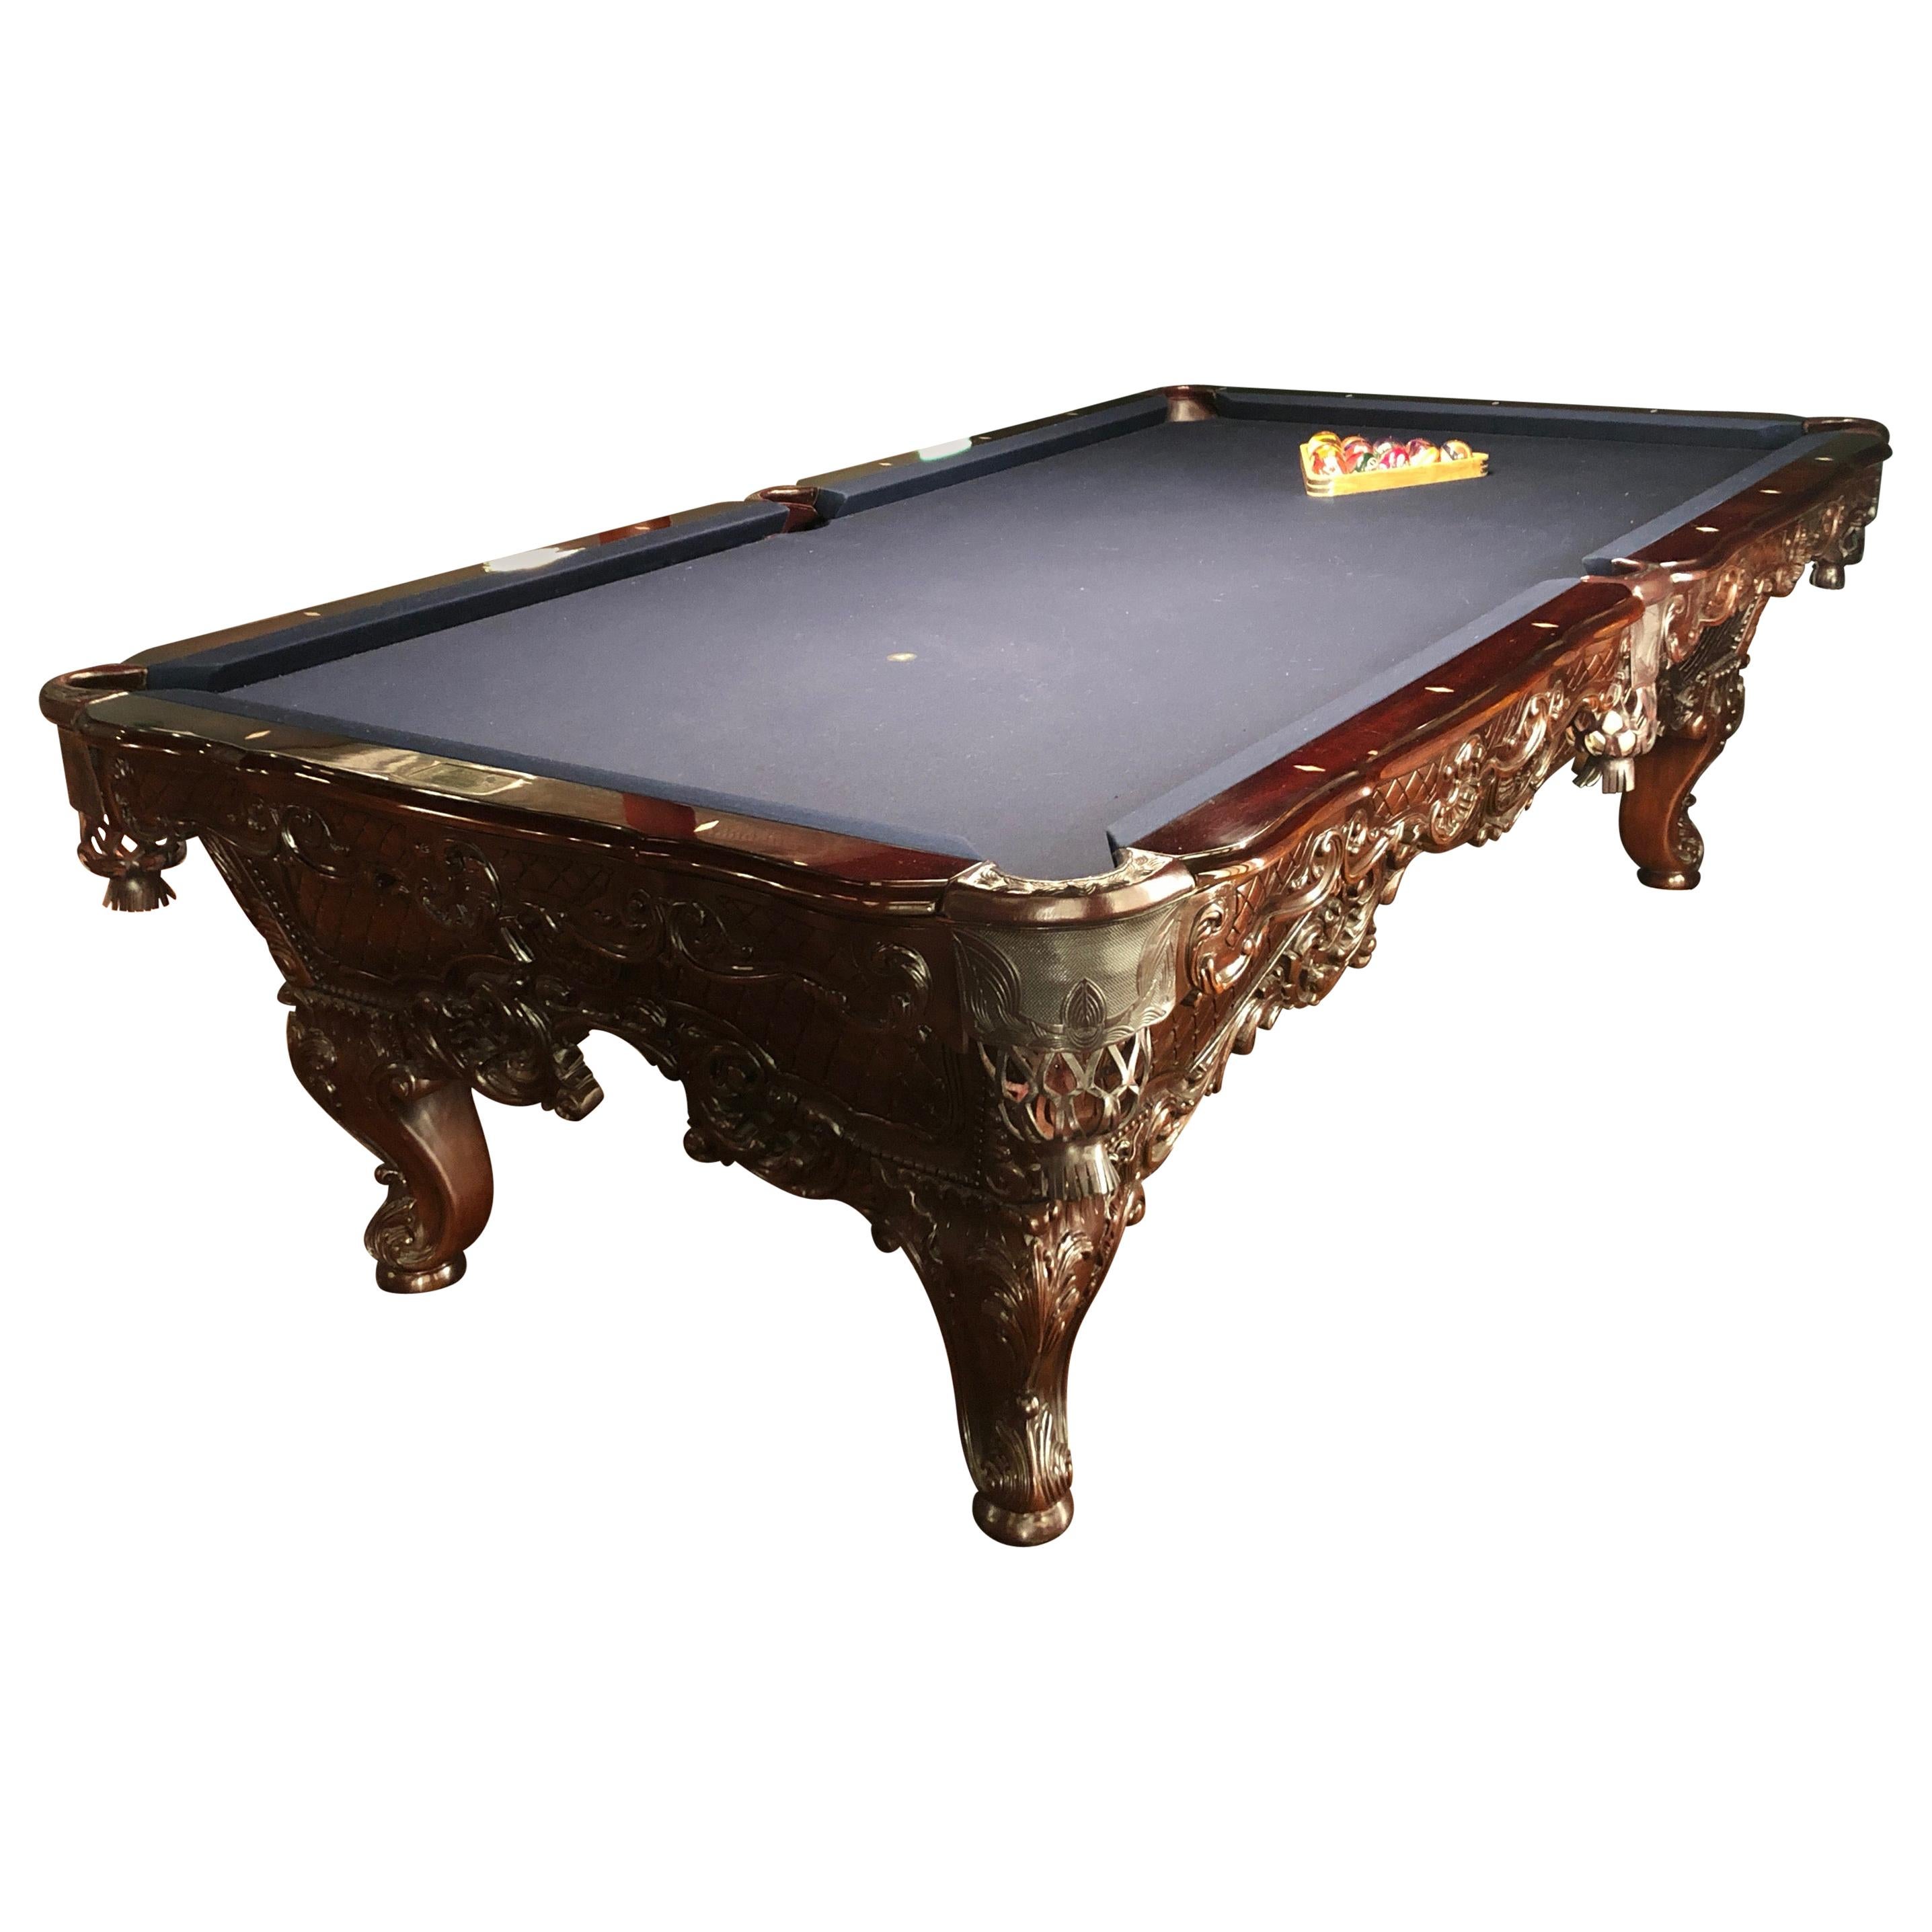 Unbelieveably Sumptuous Custom Made Mahogany and Leather Pool Billiard Table